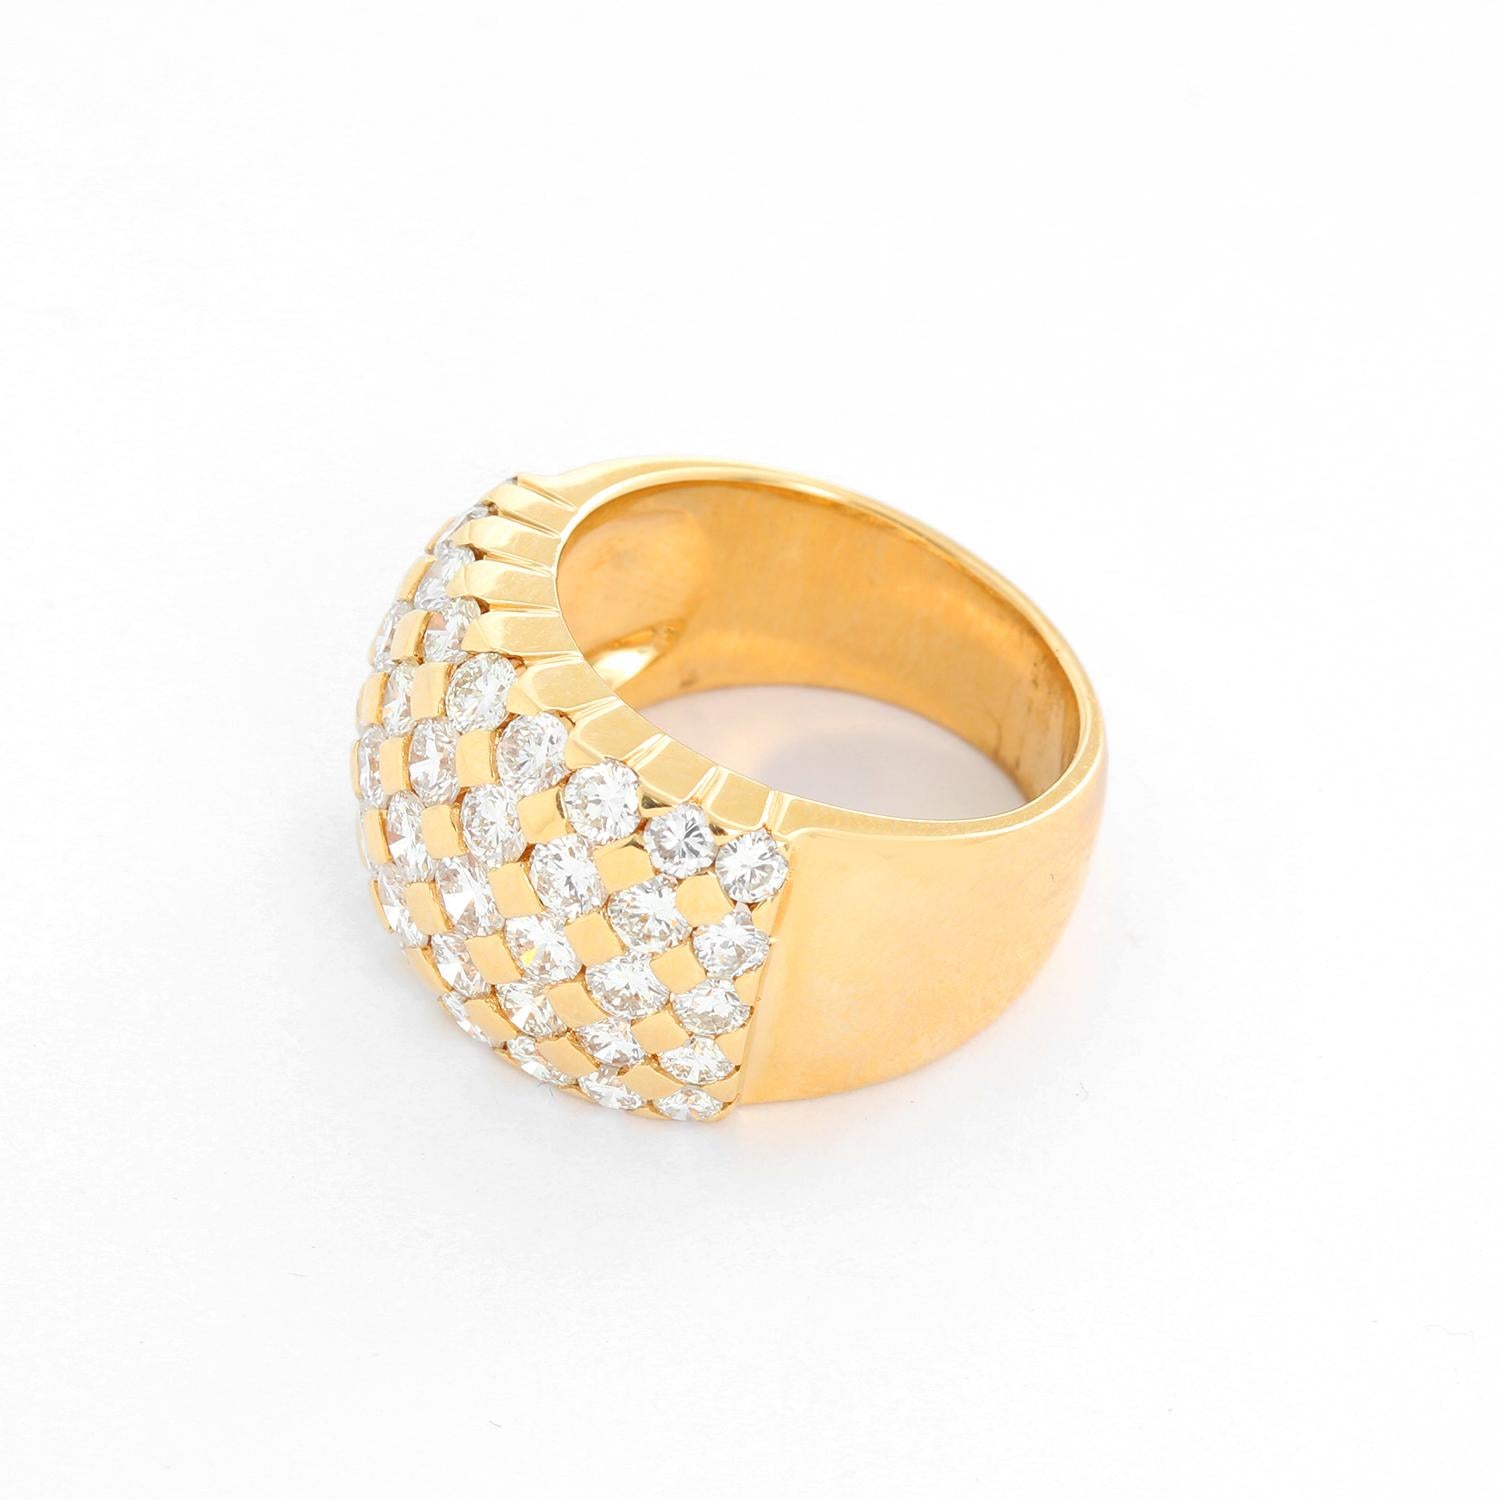 Beautiful 18K Yellow Gold and Diamond Dome Ring Size 7 1/4  - 18K Yellow gold ring with 45 pave diamonds. Weighing 3.24 carats. Size 7 1/4. Total weight 13.4 grams. Pre-owned with custom box 
This ring is easy to wear with everything on your middle